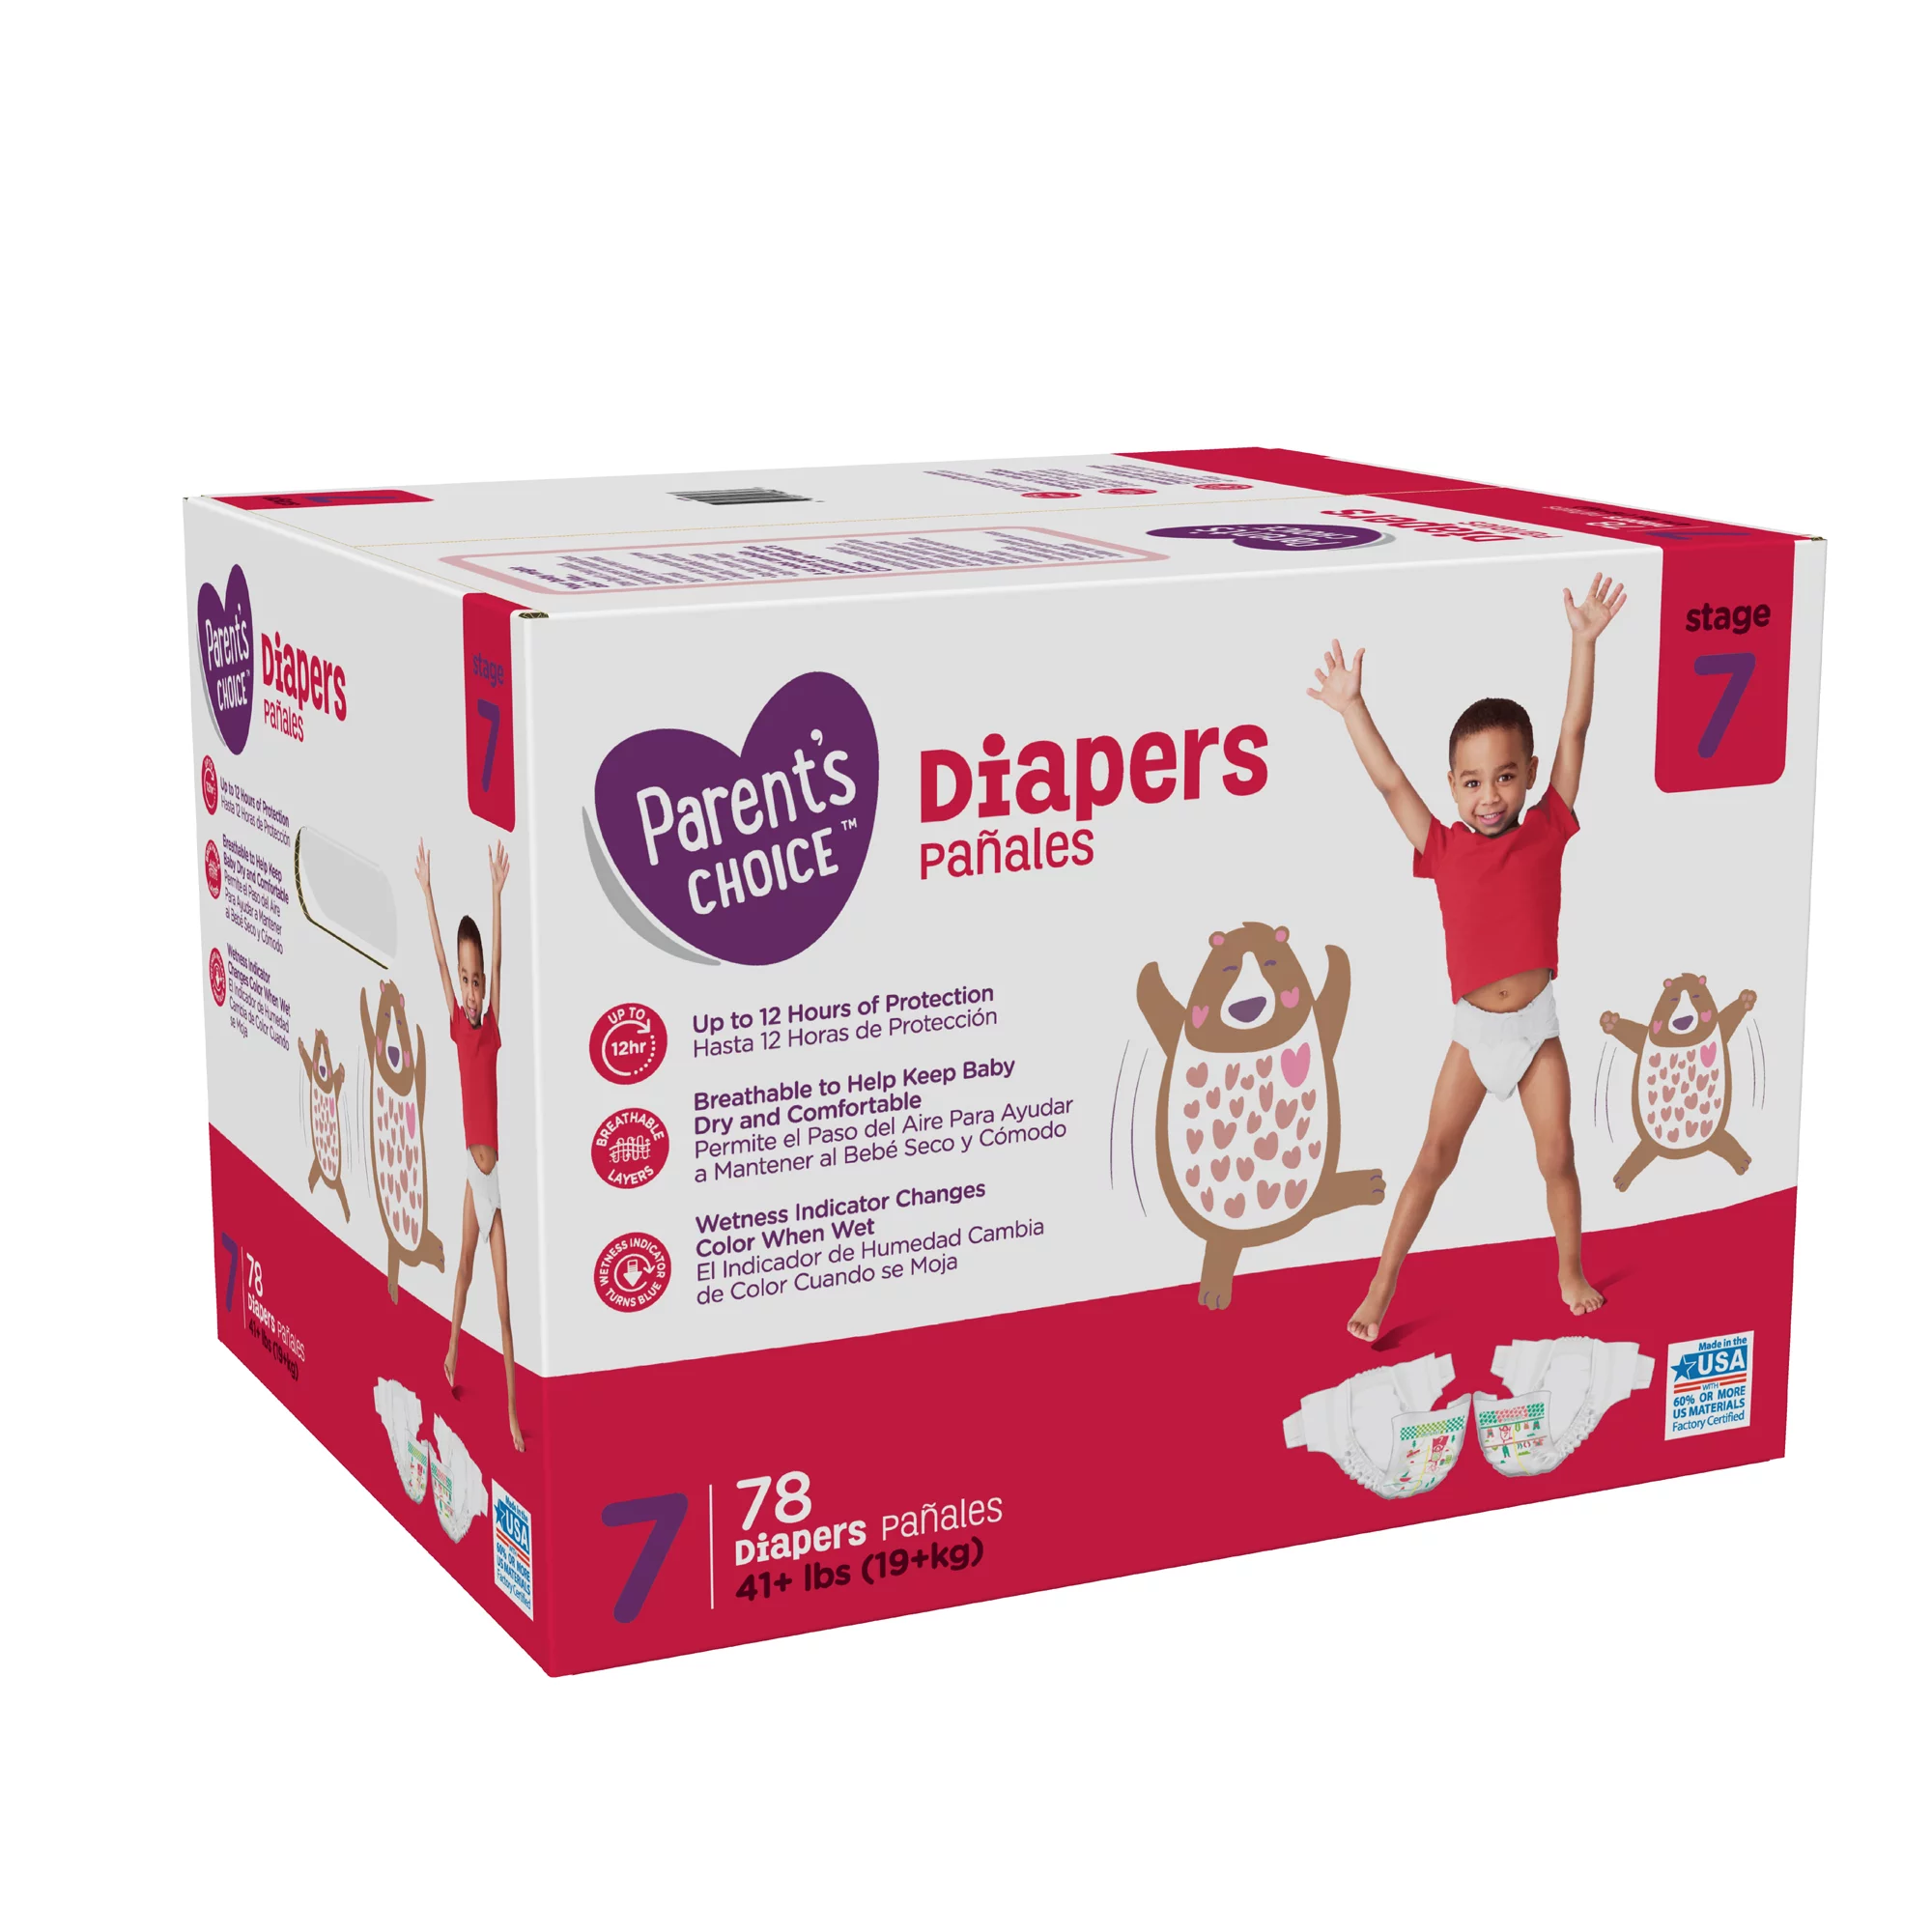 Diapers size 7, qty 78, Parent's Choice, Sealed